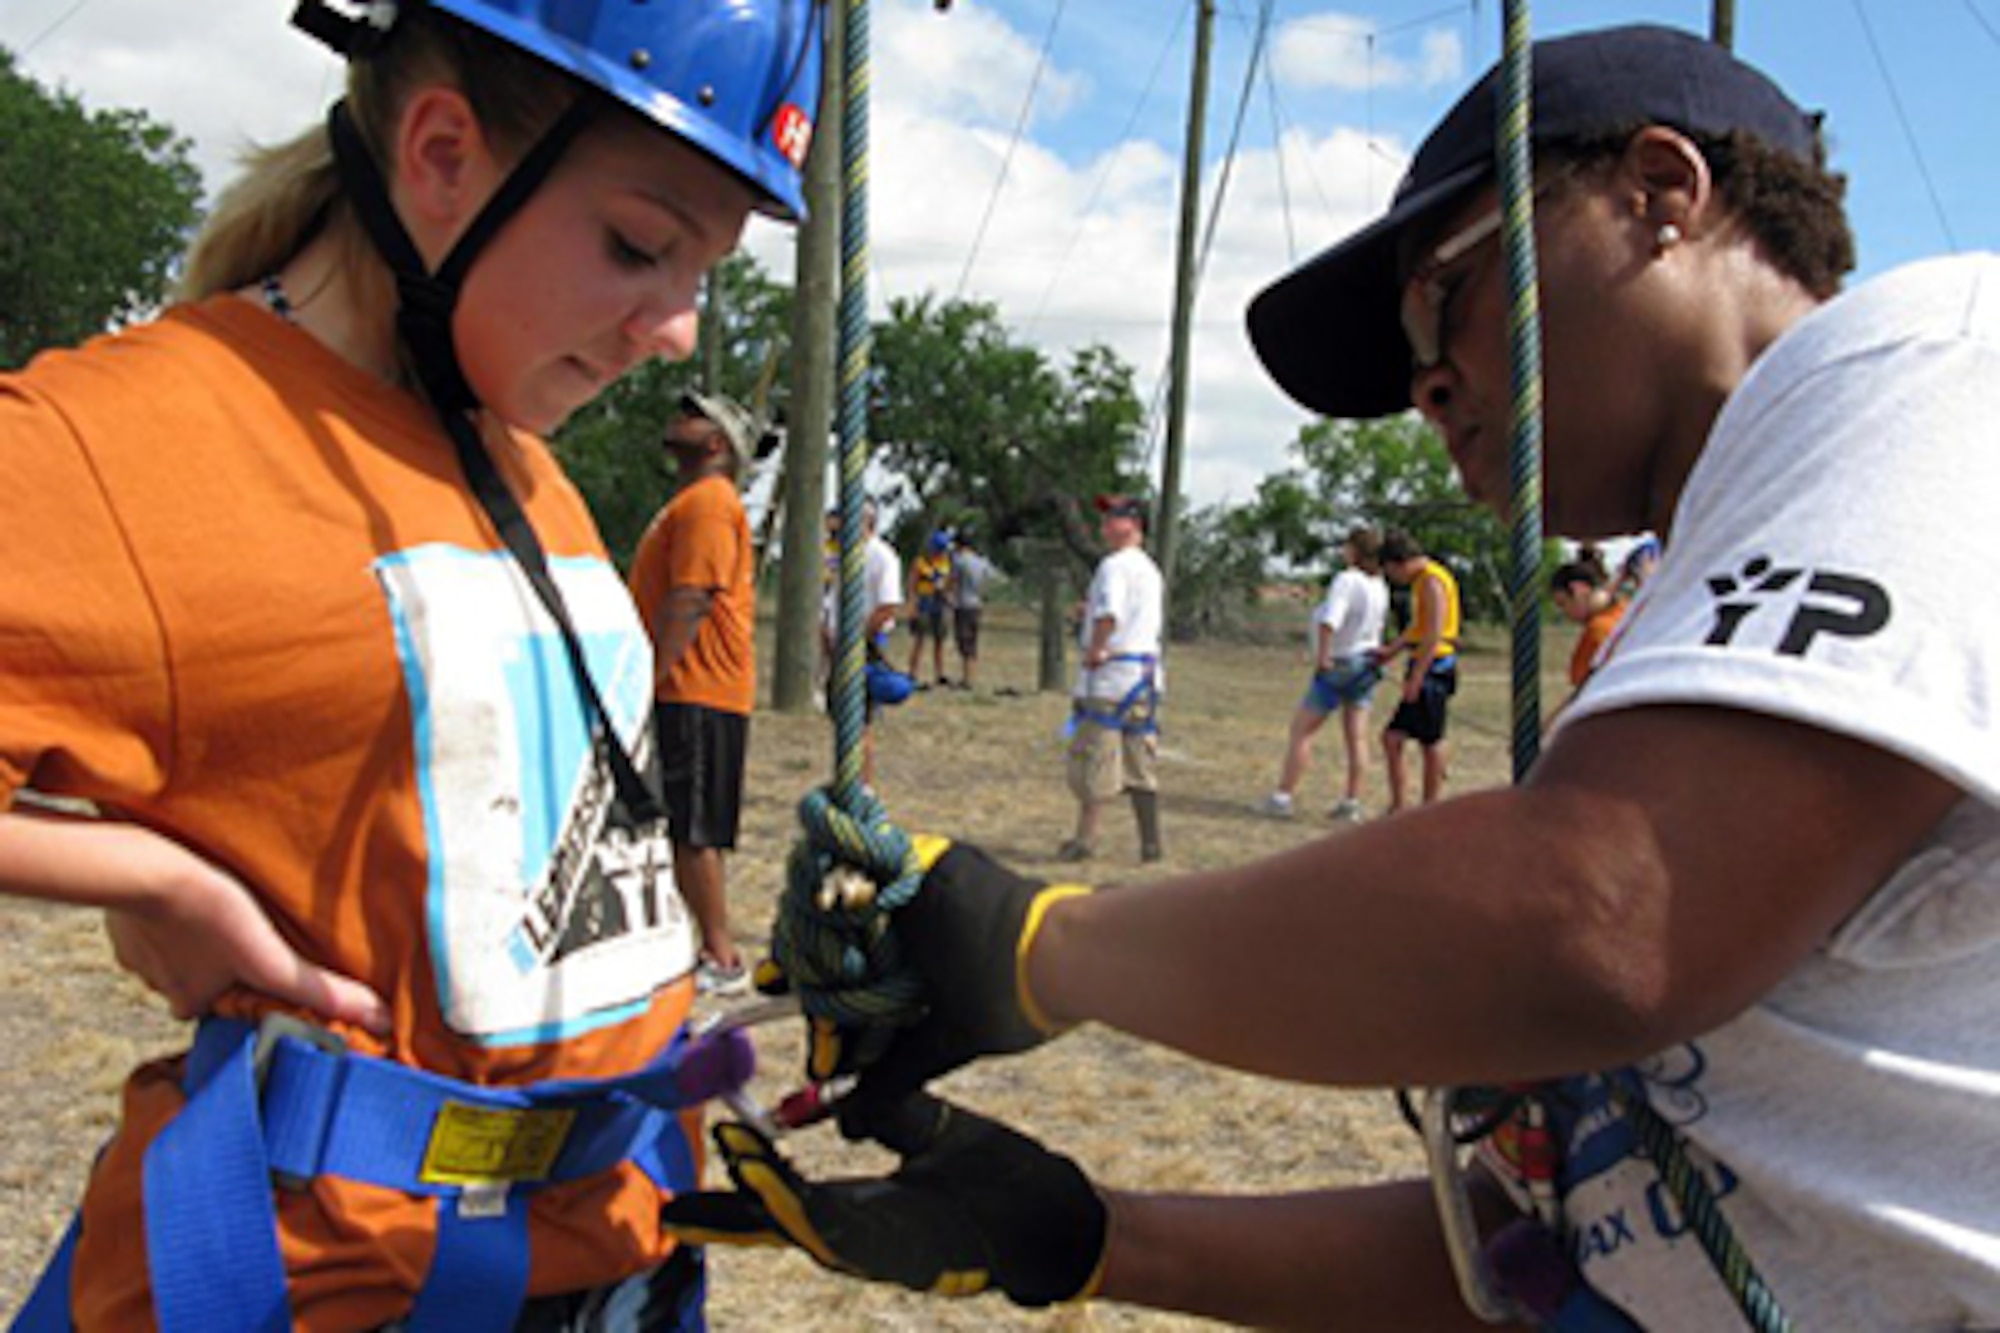 Morgan Erikson, an Air Force teen from Nellis Air Force Base, Nev., is strapped into her harness by Karen Hudson, a youth program specialist from Joint Base Charleston, S.C. during a high ropes challenge at Lackland Air Force Base, Texas July 12. The  challenge was part of an Air Force Teen Leadership Camp held in San Antonio July 11-15. More than 80 Air Force teens from Air Force installations worldwide learned about college life, teamwork and leadership skills during the camp. (Courtesy photo)